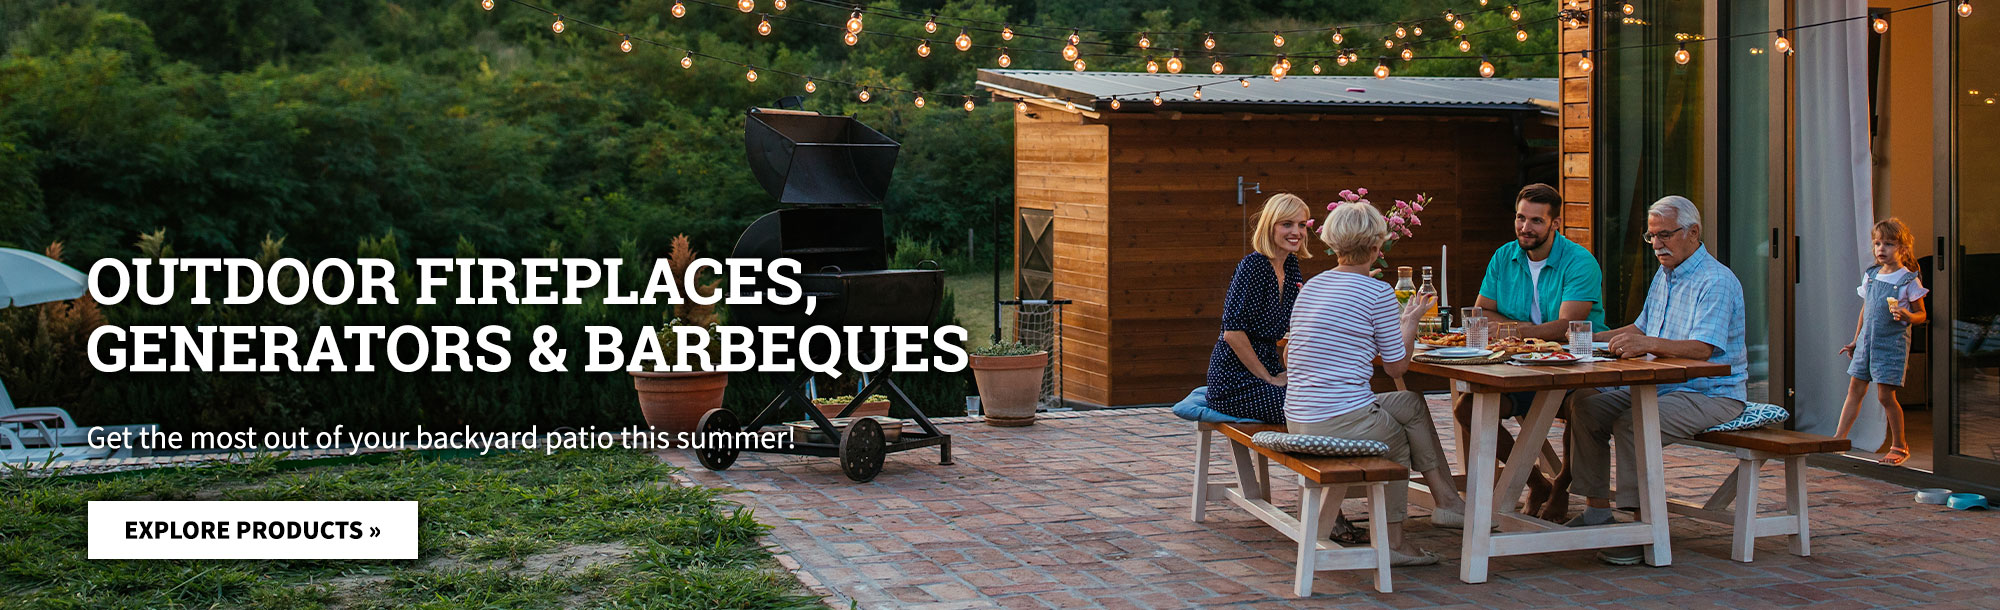 Get the most out of your summer patio season! 